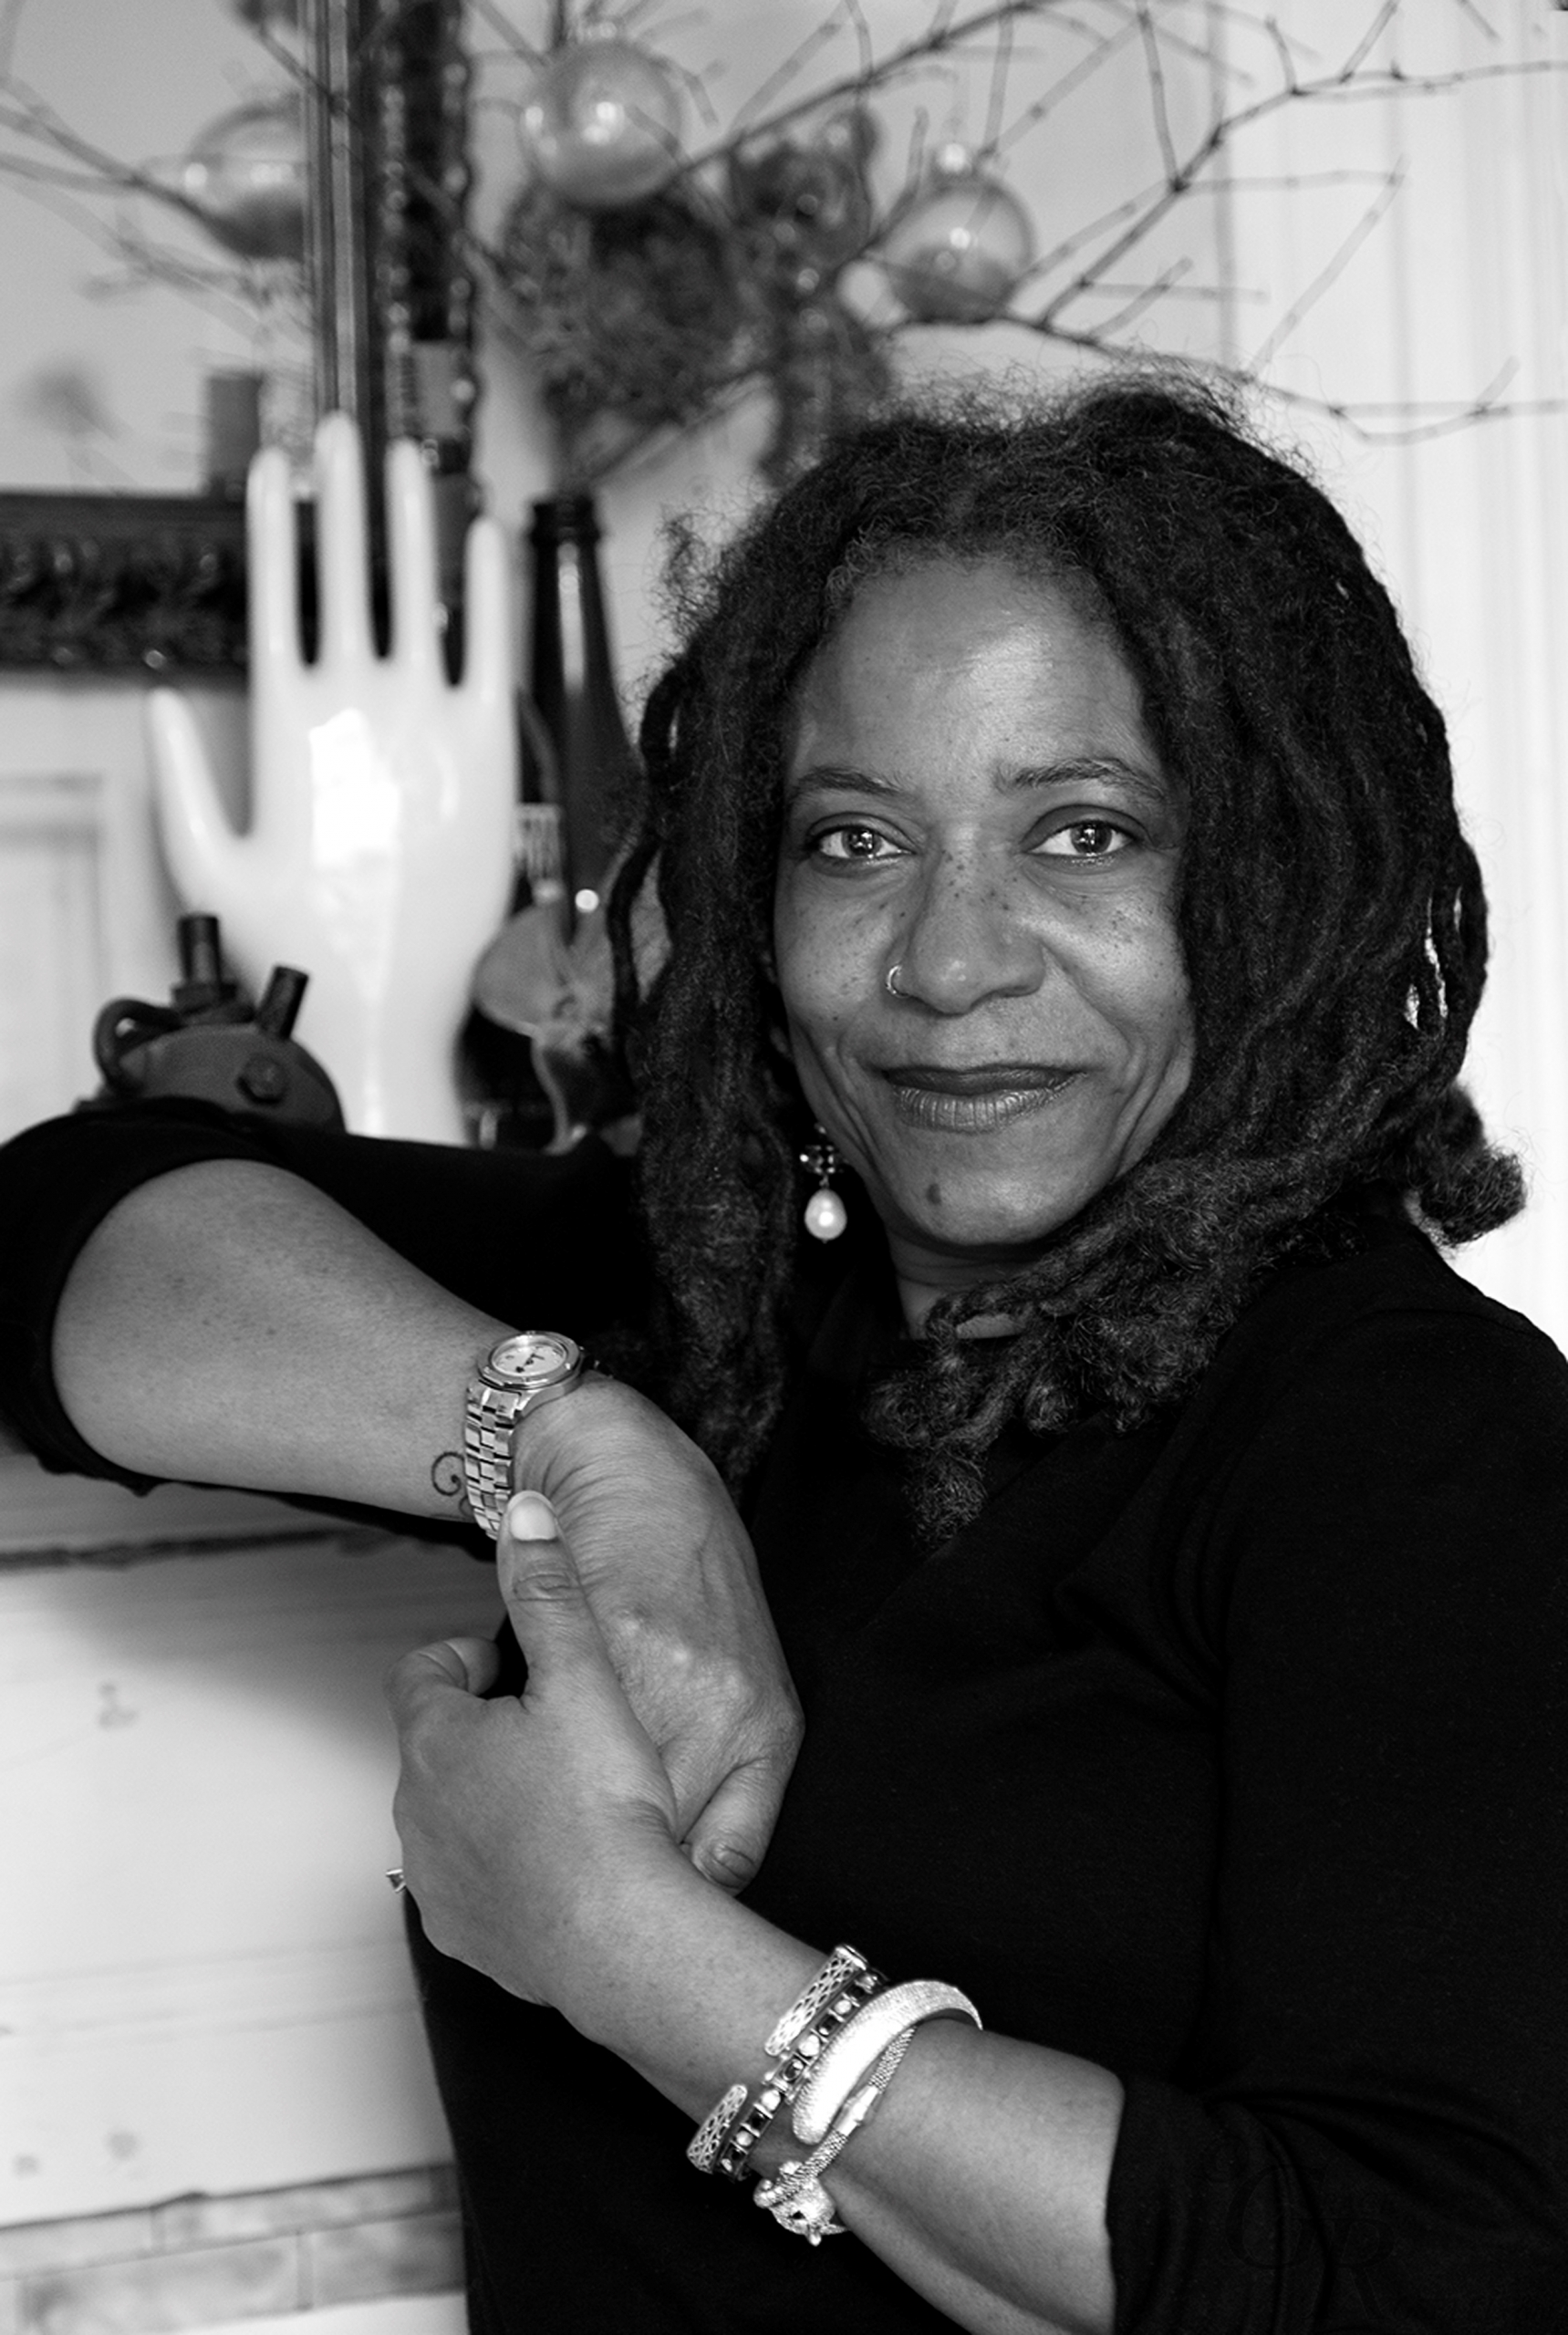 Black and white photograph of artist Renée Stout